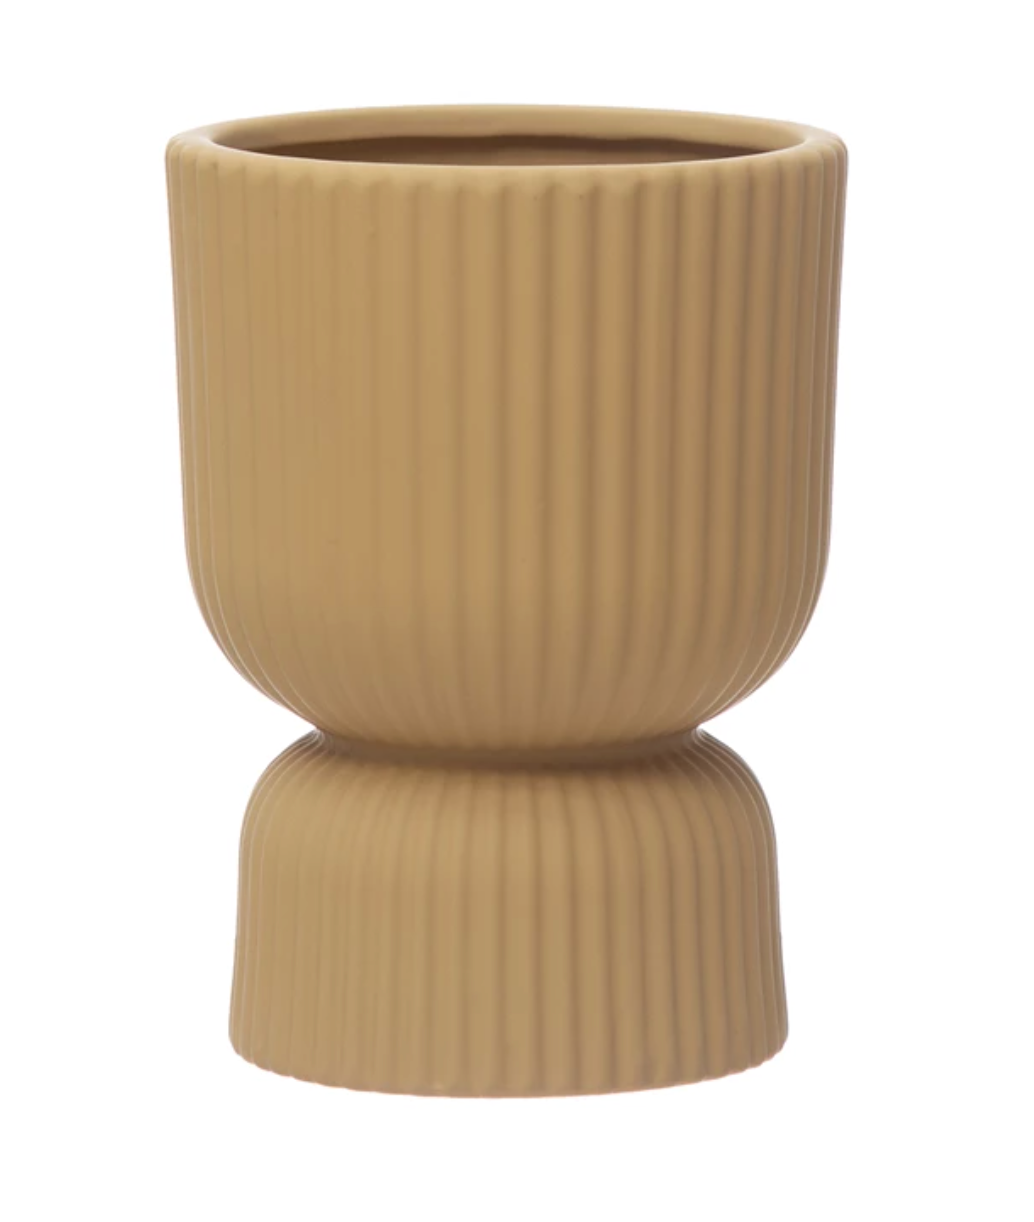 Stoneware Pleated Footed Planter - Bloomingville